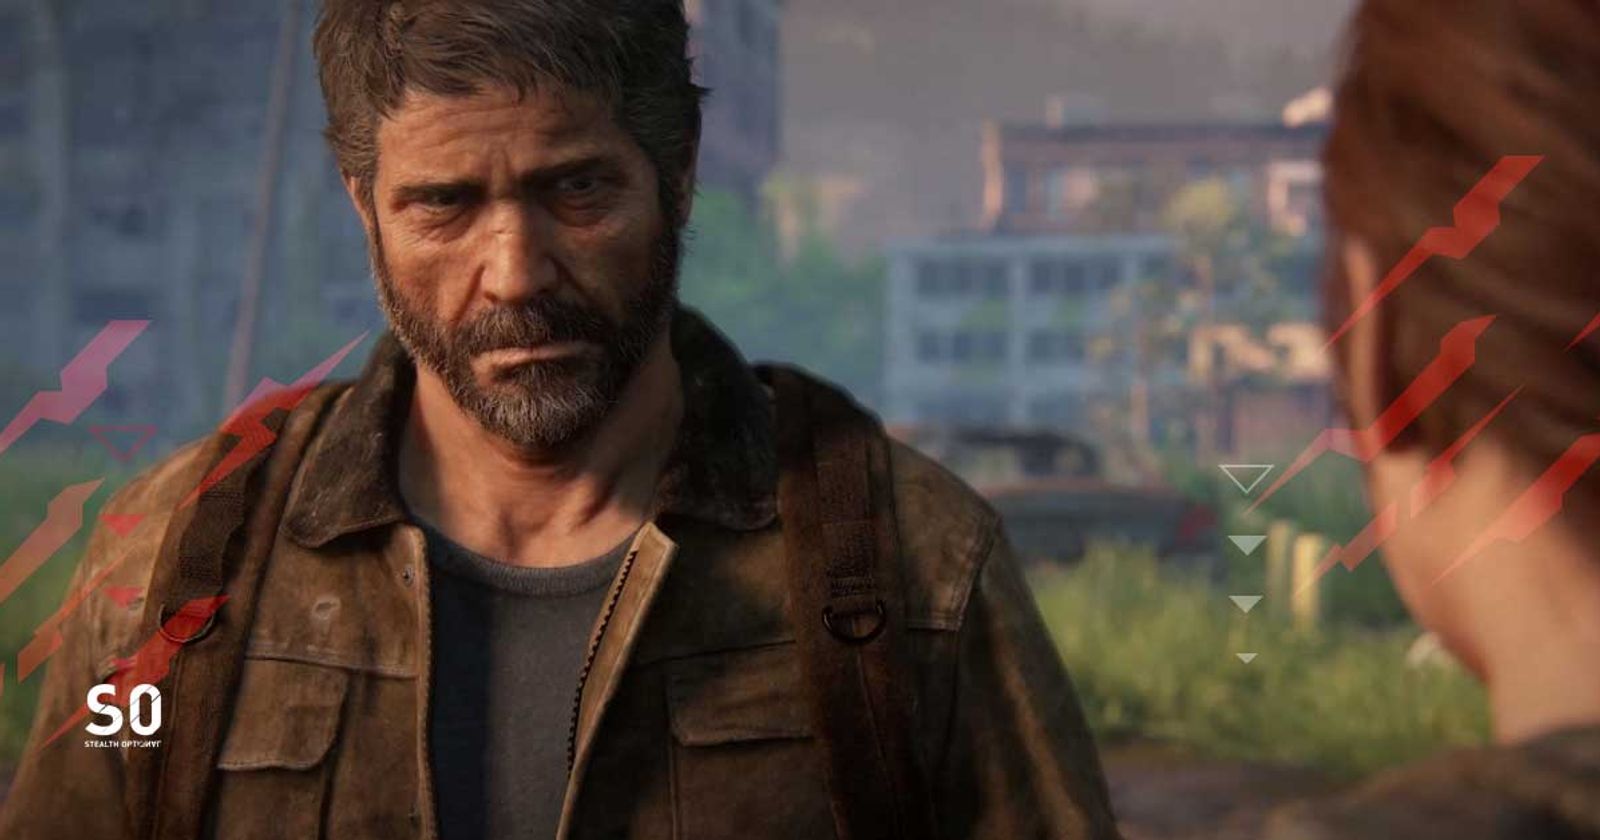 Troy Baker doesn't really think The Last of Us has villains - The Verge